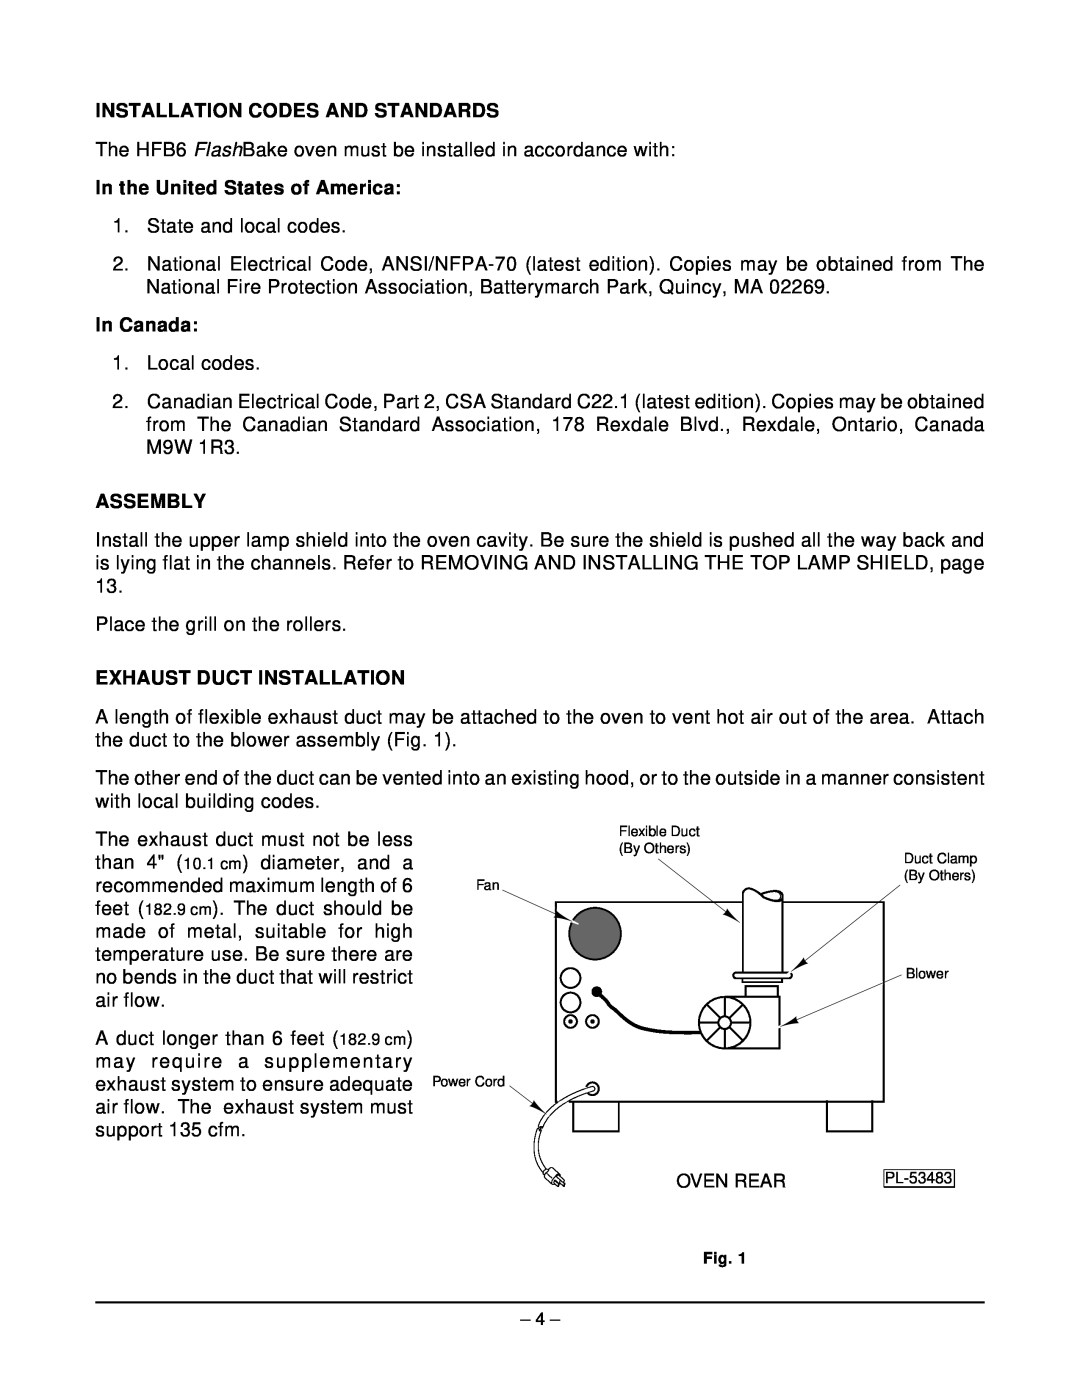 Hobart HFB6 manual Installation Codes And Standards, In the United States of America, In Canada, Assembly 